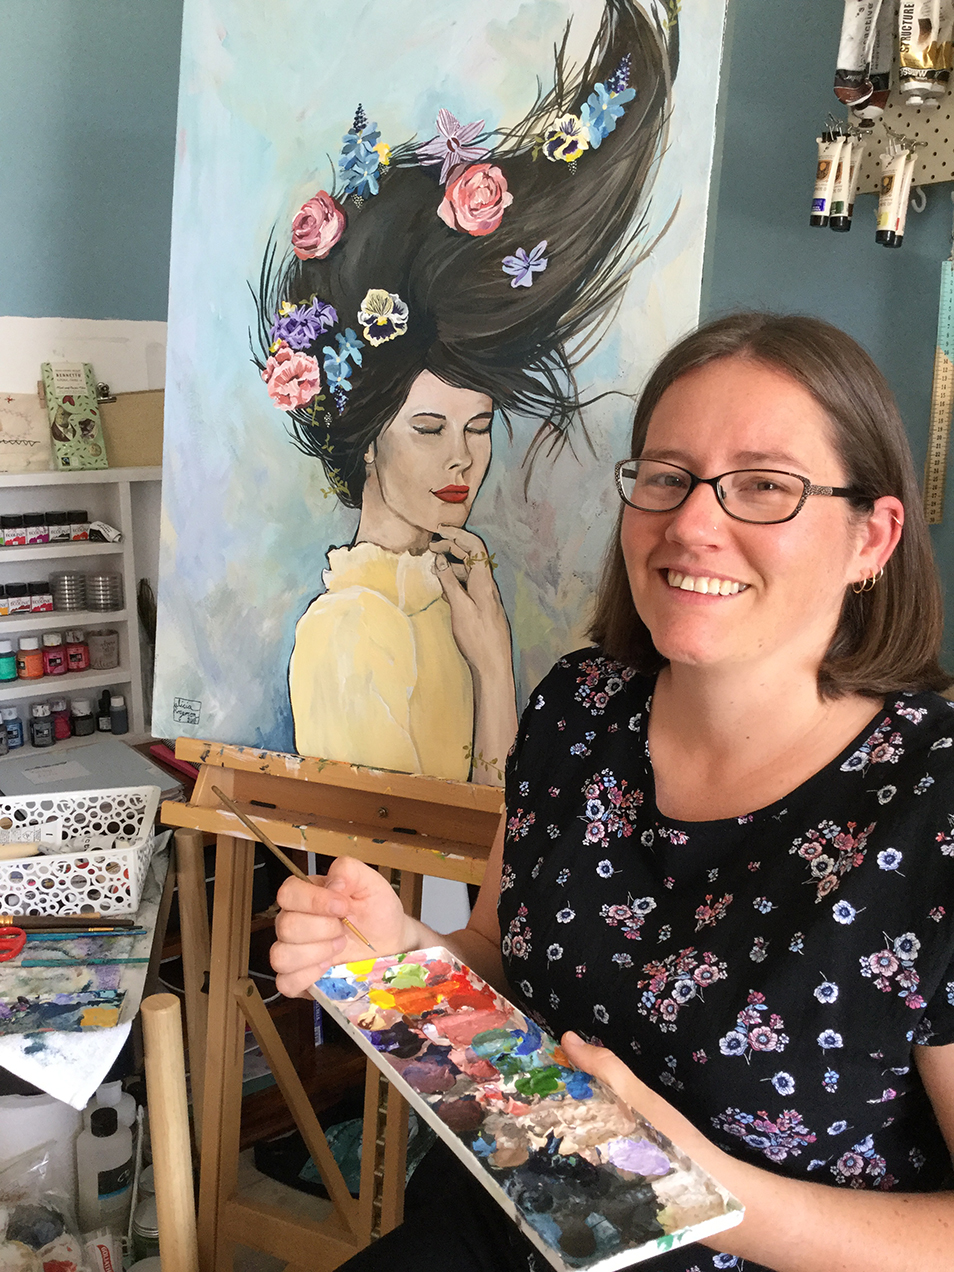 Alicia Rogerson holding a painting palette and sitting in her art studio. She is smiling at the camera and sitting in front of one of her paintings on an easel which depicts a woman with flowers in her hair.